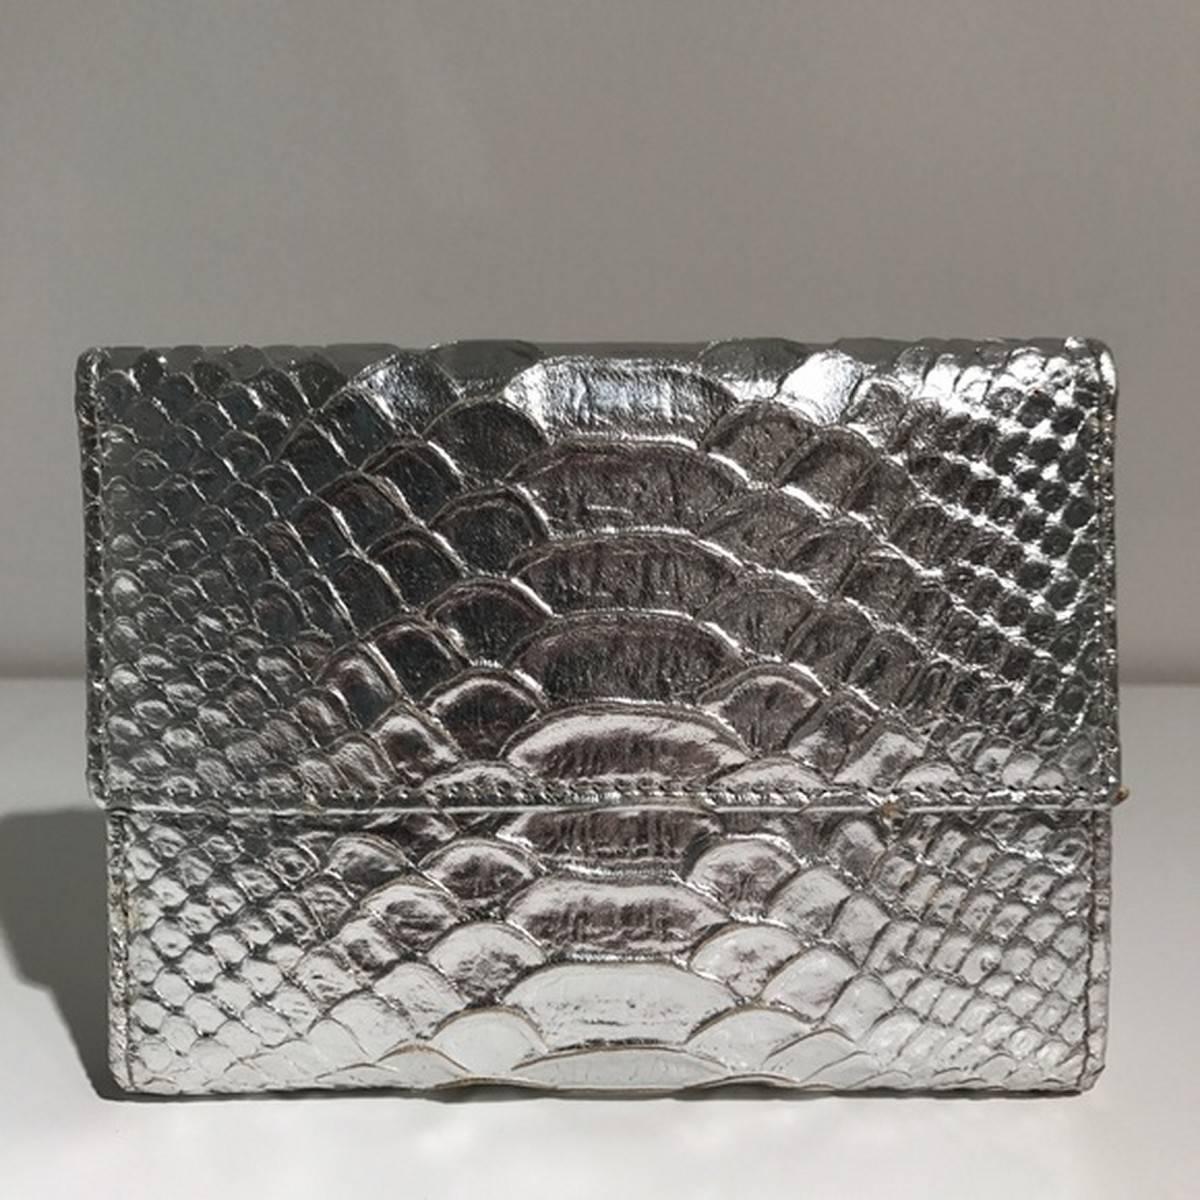 Roberto Cavalli Snakeskin Silver Wallet

Brand new.
Snakeskin Leather inside and out.
Made in Italy.
